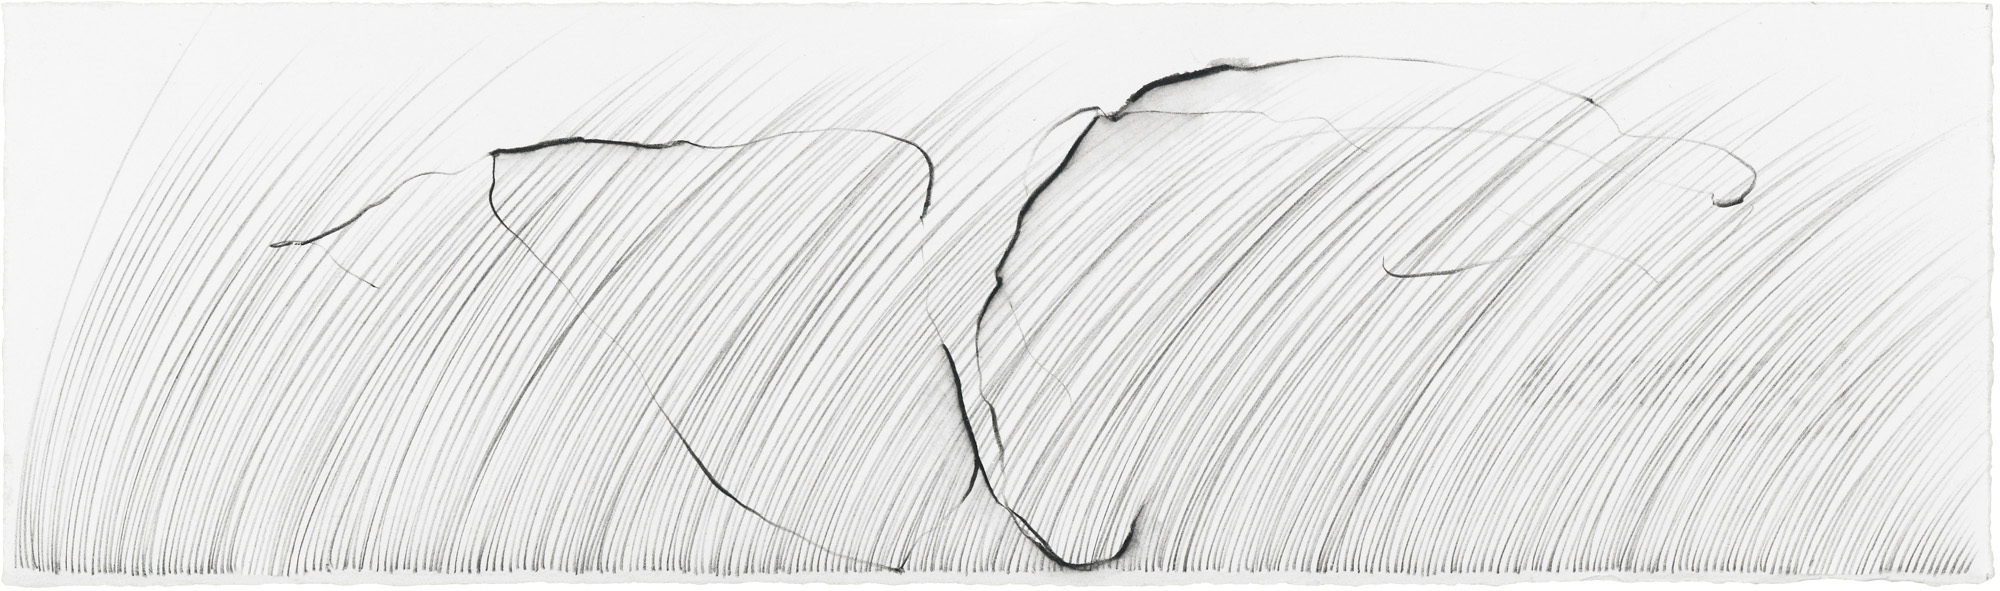 Grass Being, I   graphite and soluble pencil on cotton paper, 4 ¼ x 14 ½ inches, 2013